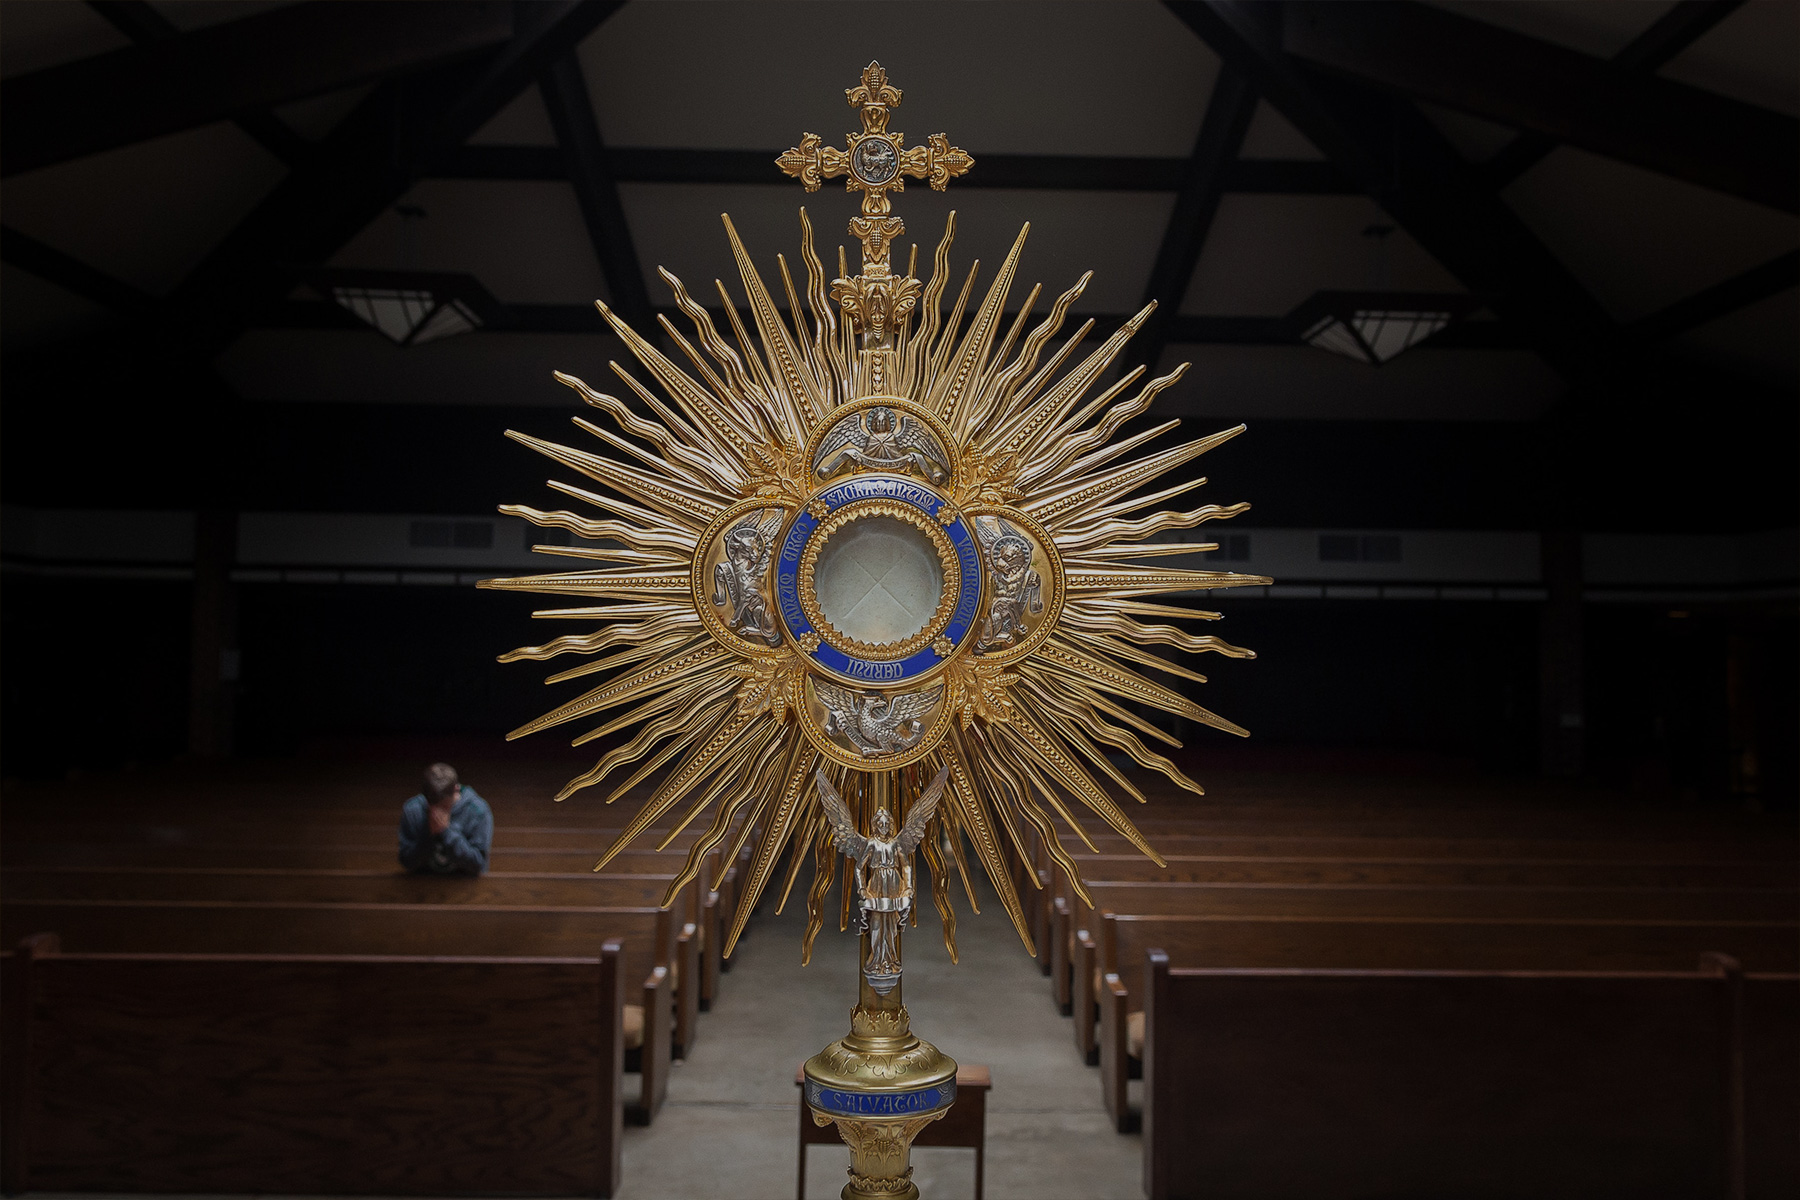 Tour featuring more than 150 relics to visit Omaha Archdiocese The